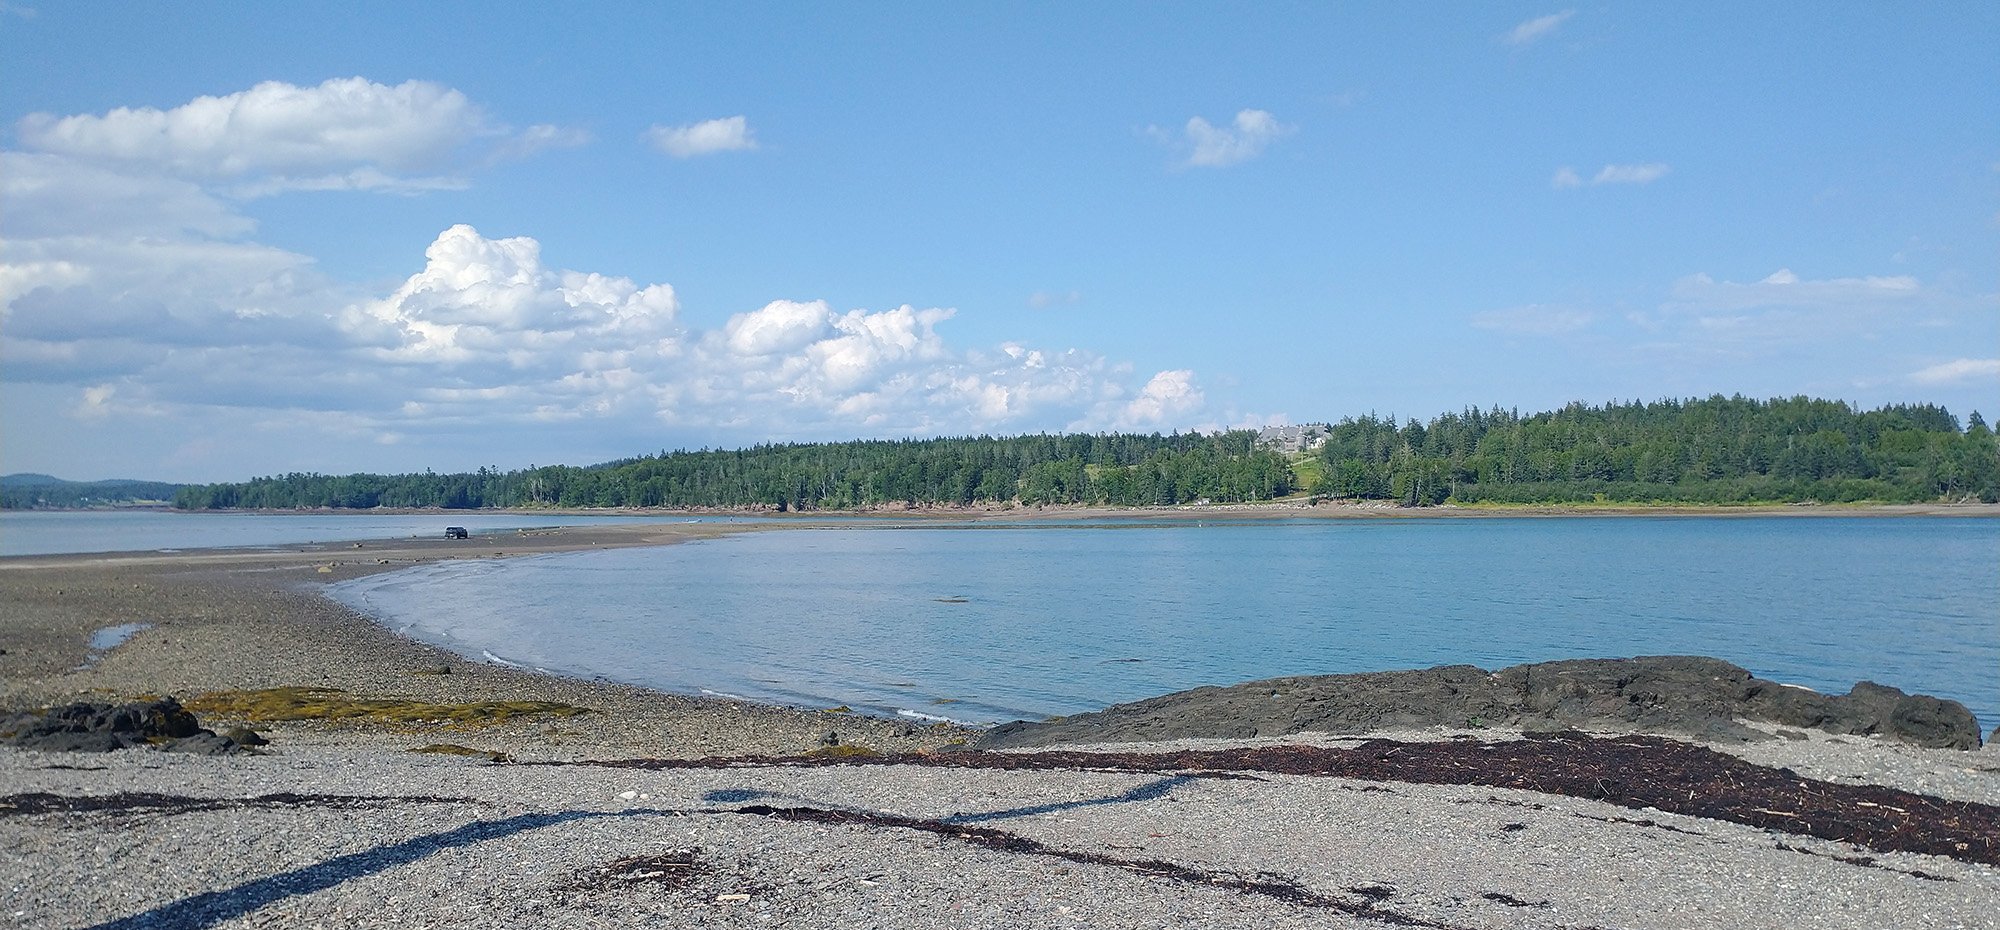 You can drive across ( I assume only at low tide?) to the Minstrel Island and hike/bike around the trails.